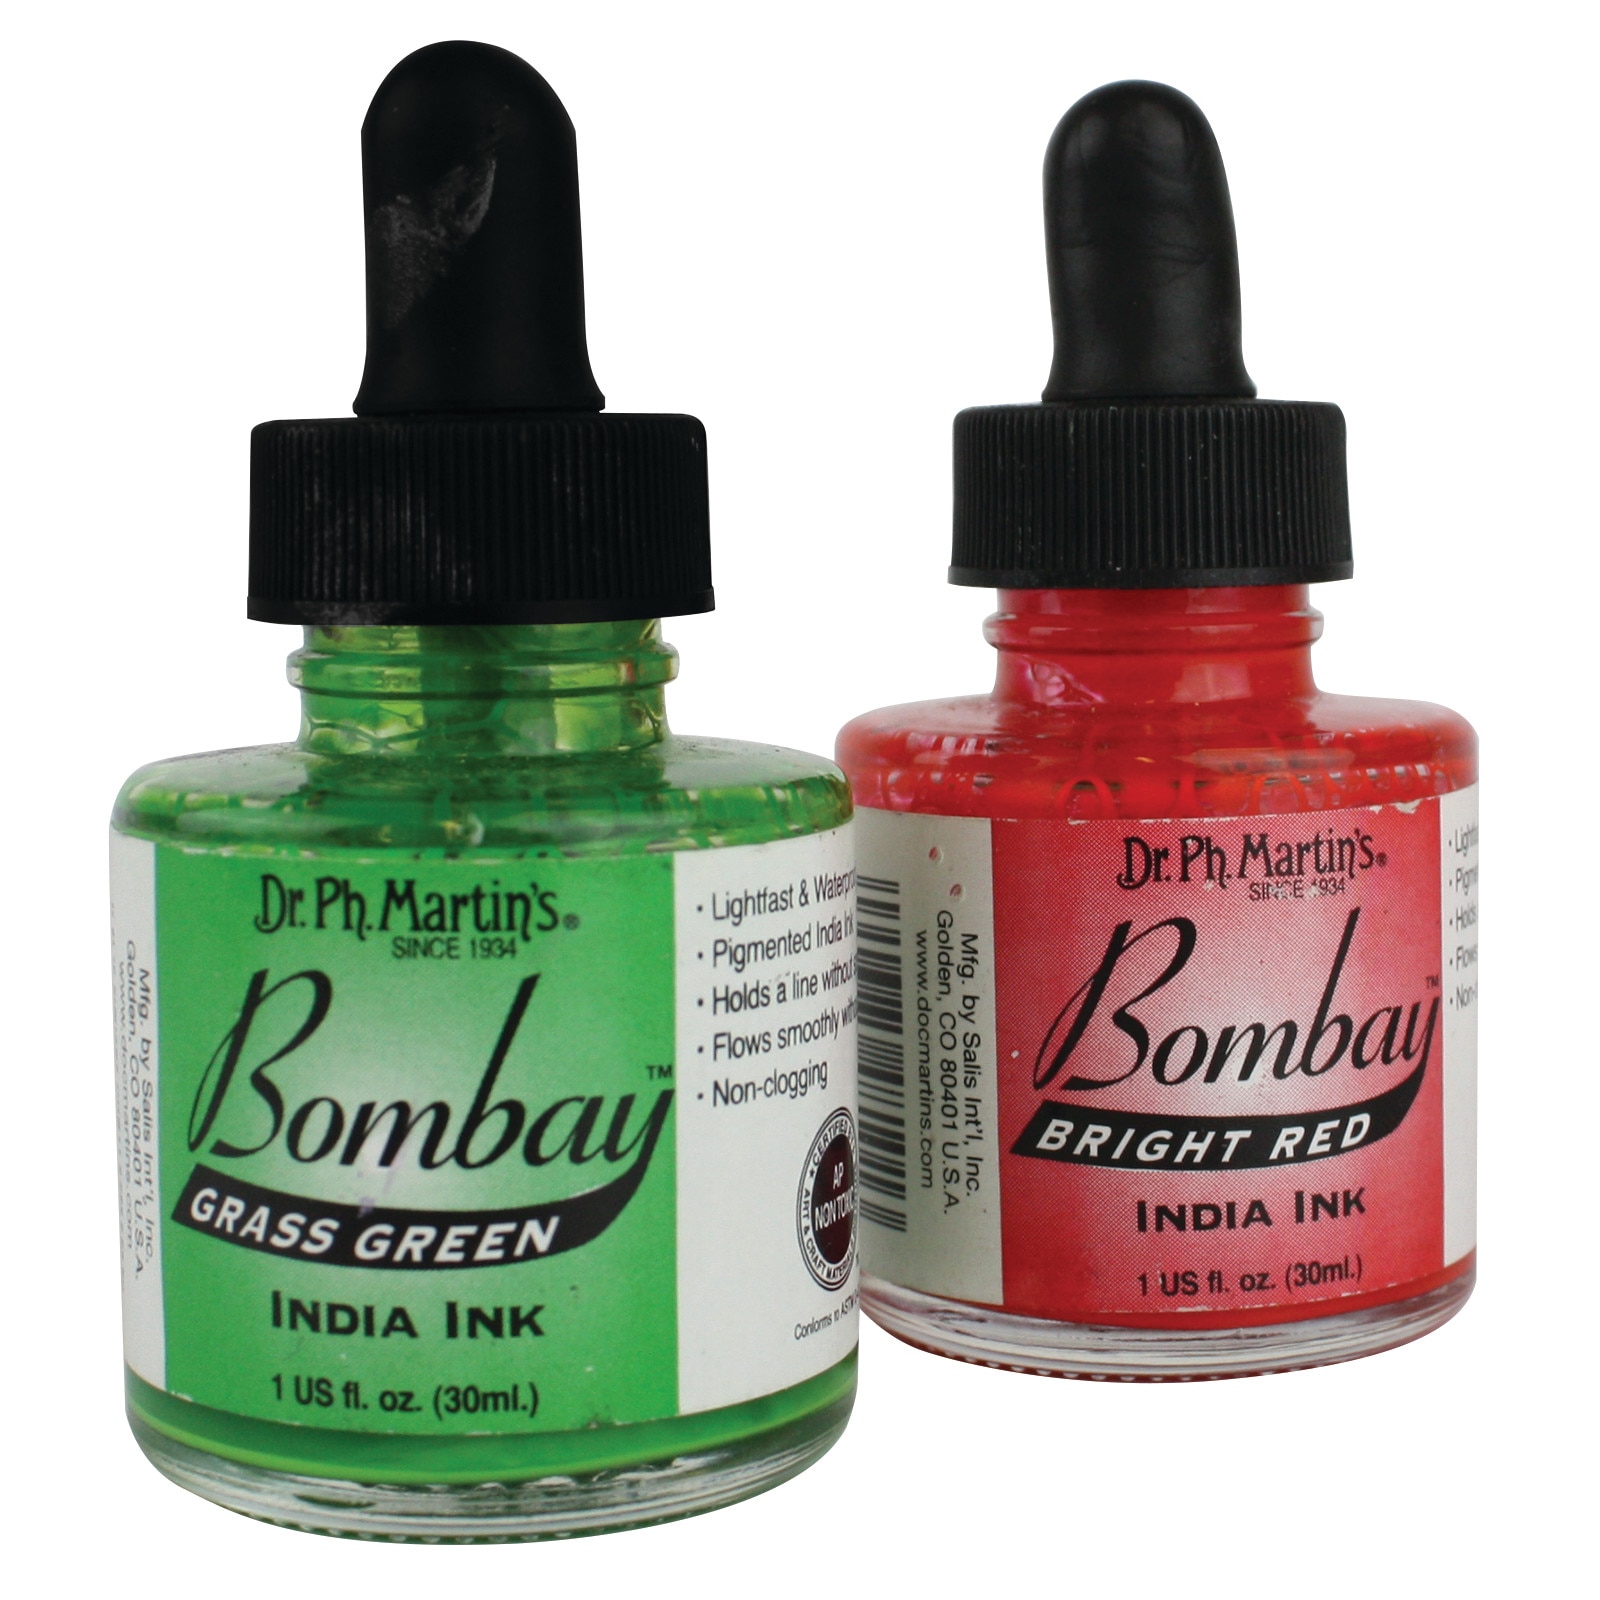 Bombay India Ink Bright Red 1 Oz